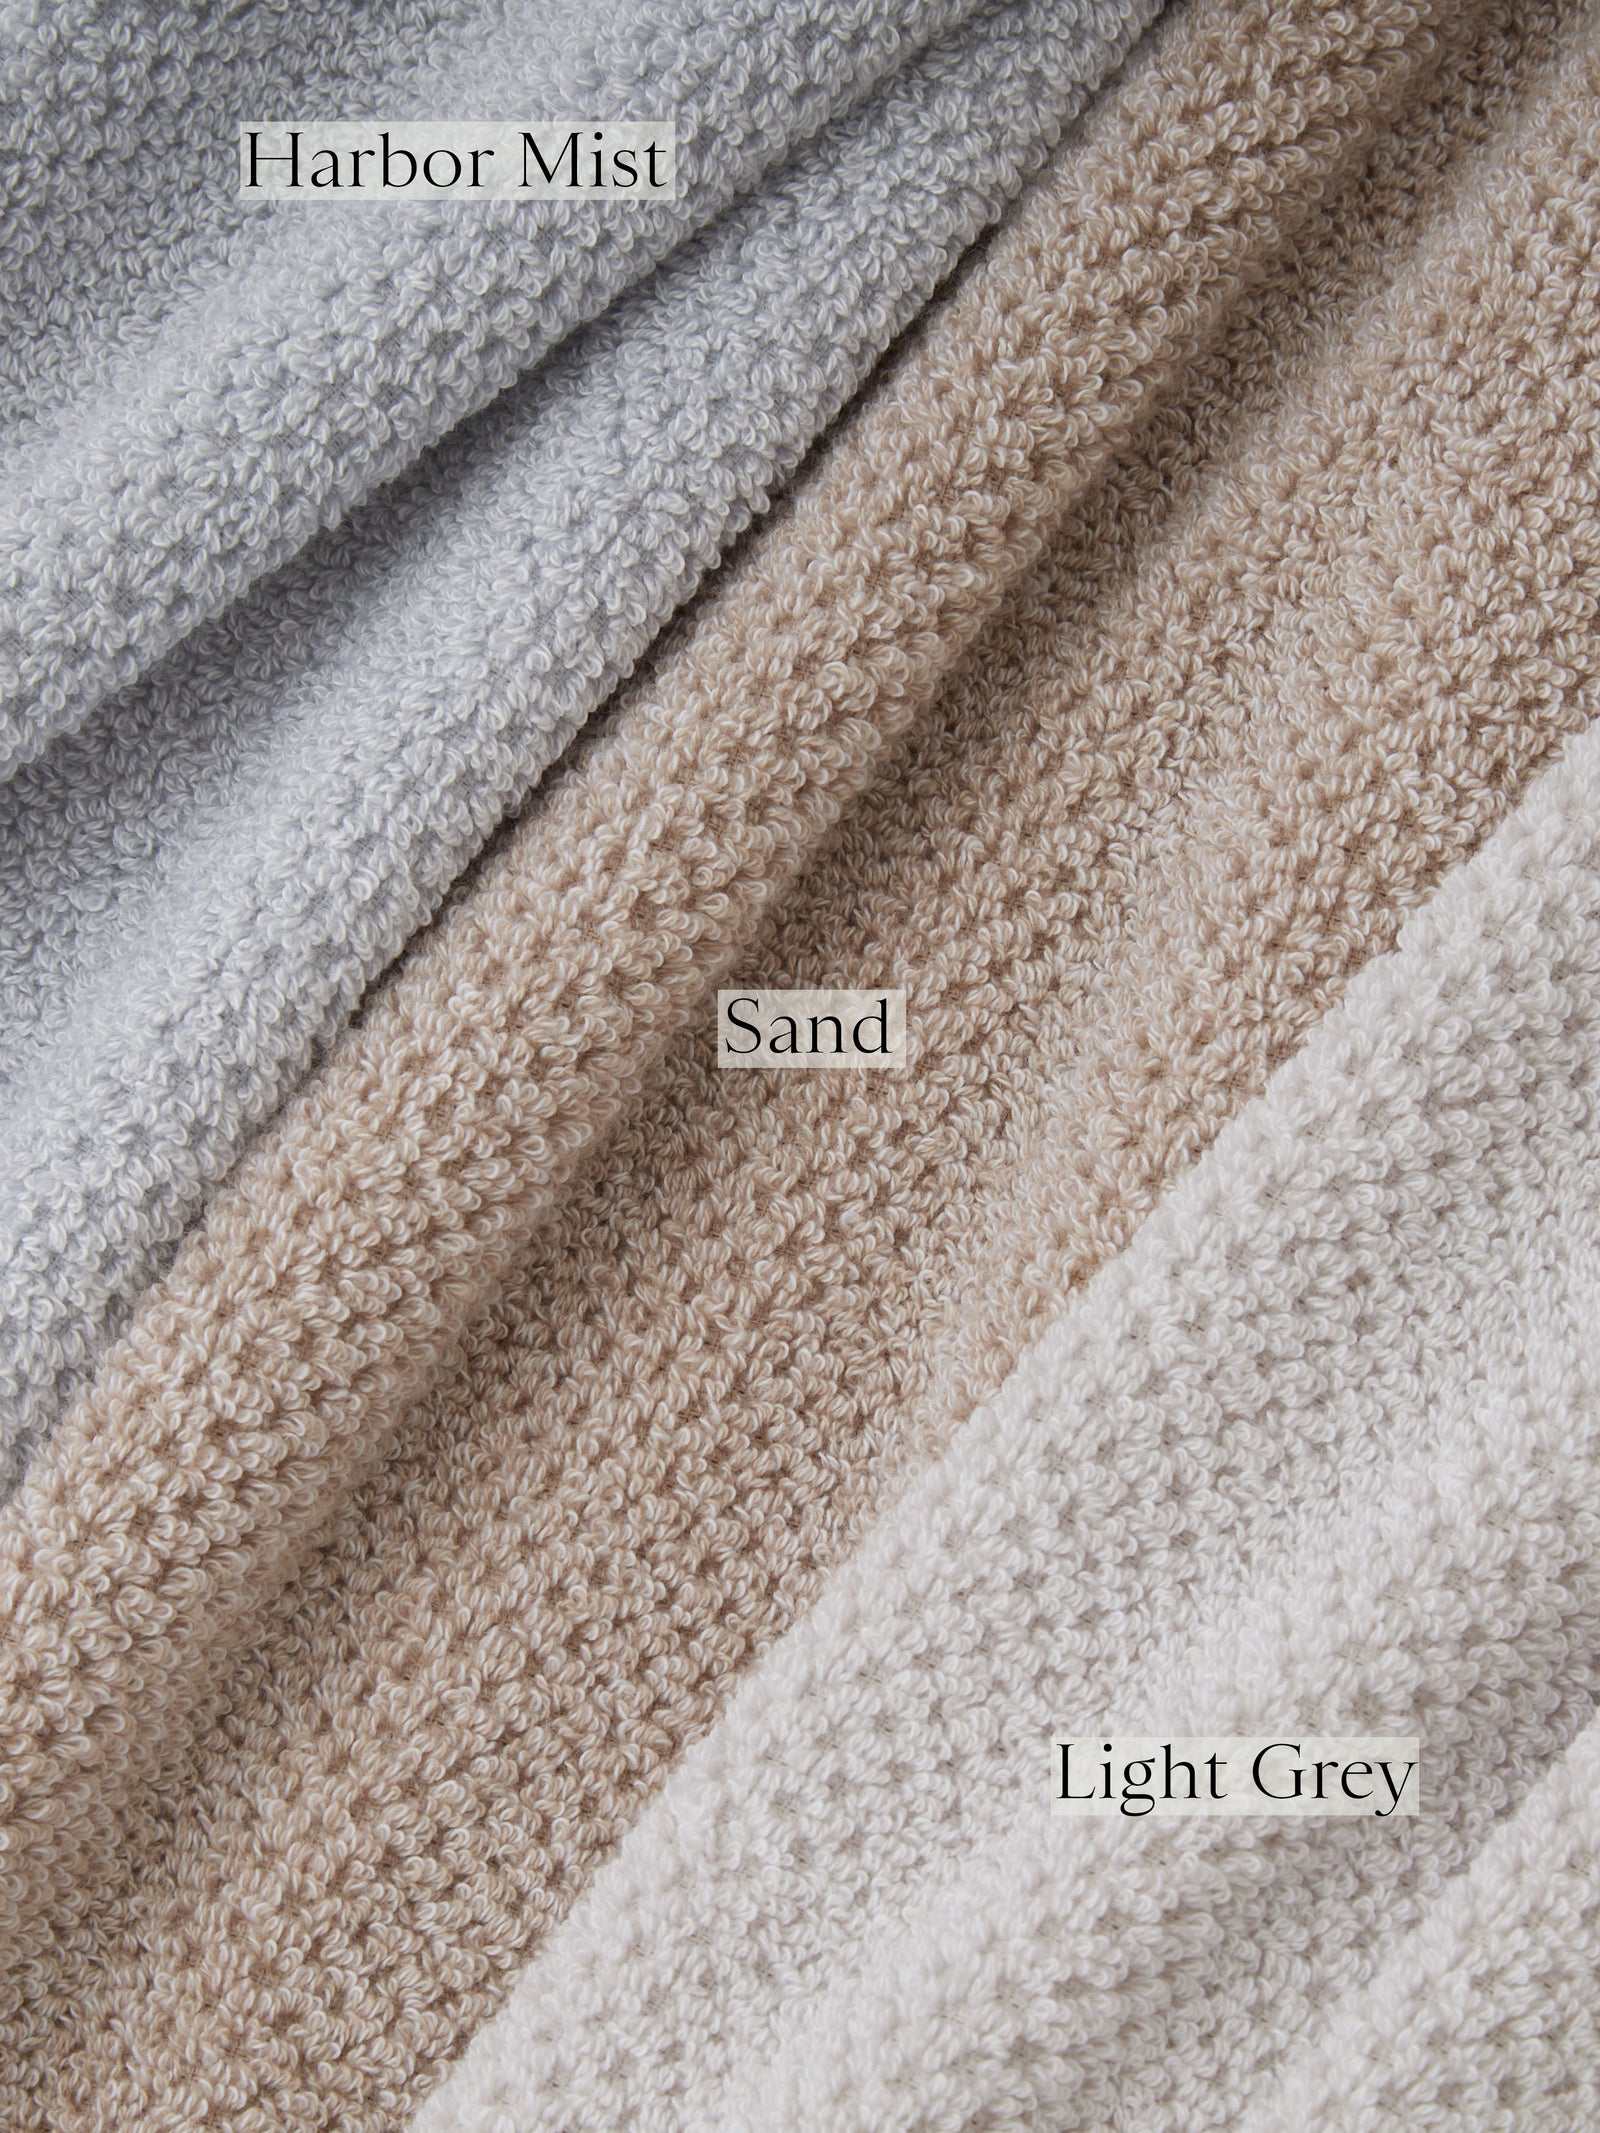 Nantucket Bath Towels. Photo of Nantucket Bath Towels taken as a close up of the towels. Only the towels can be seen.